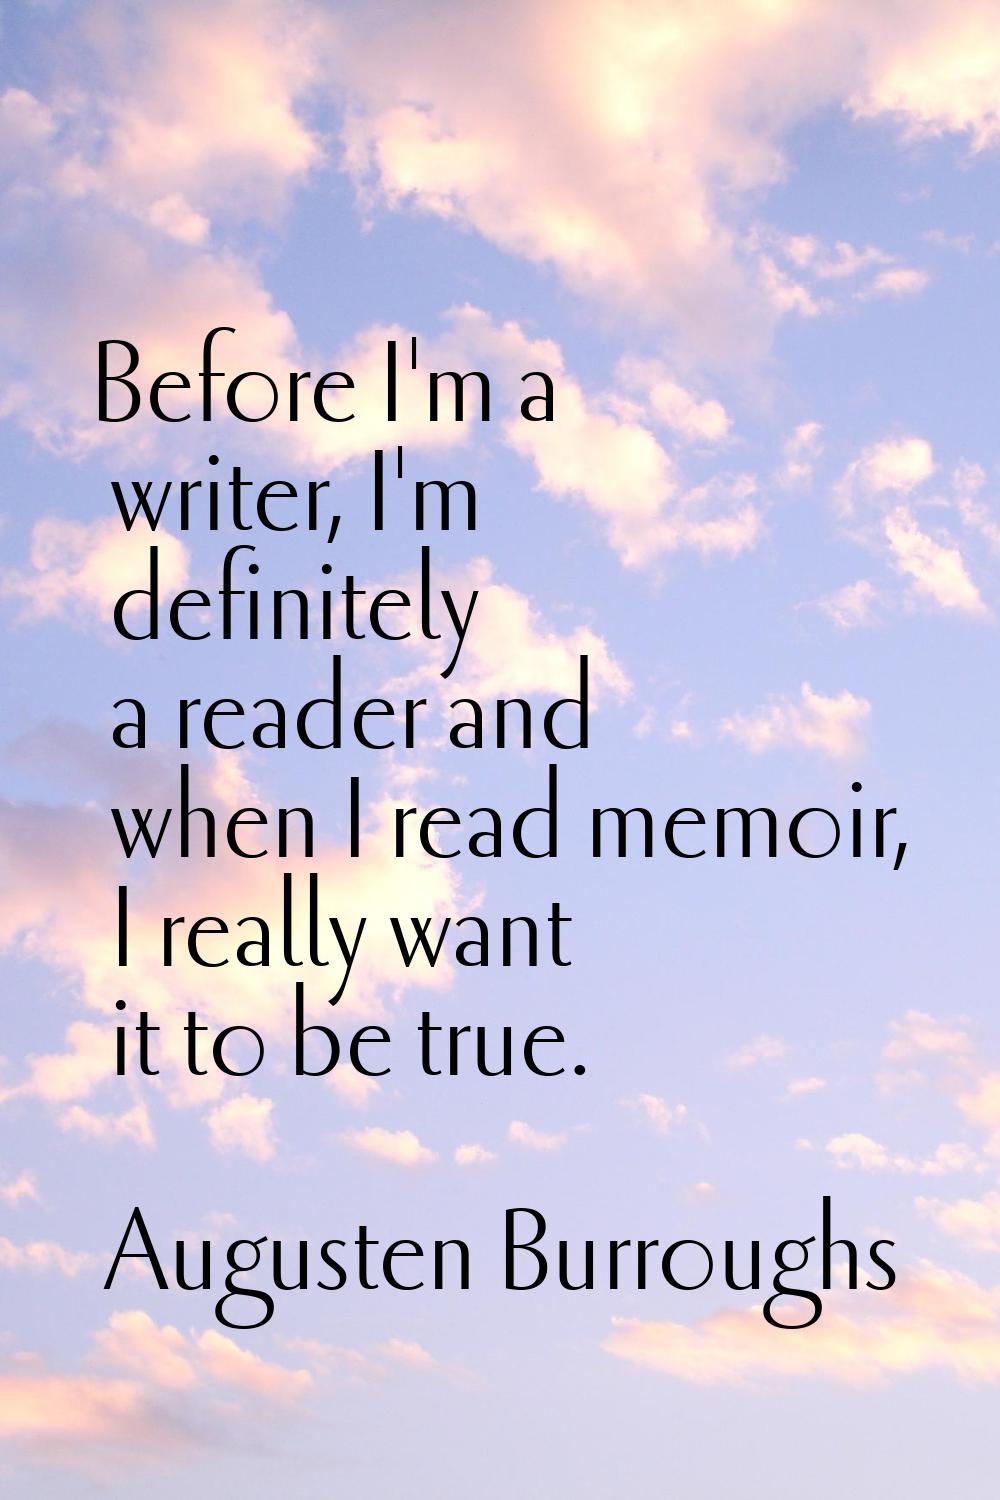 Before I'm a writer, I'm definitely a reader and when I read memoir, I really want it to be true.